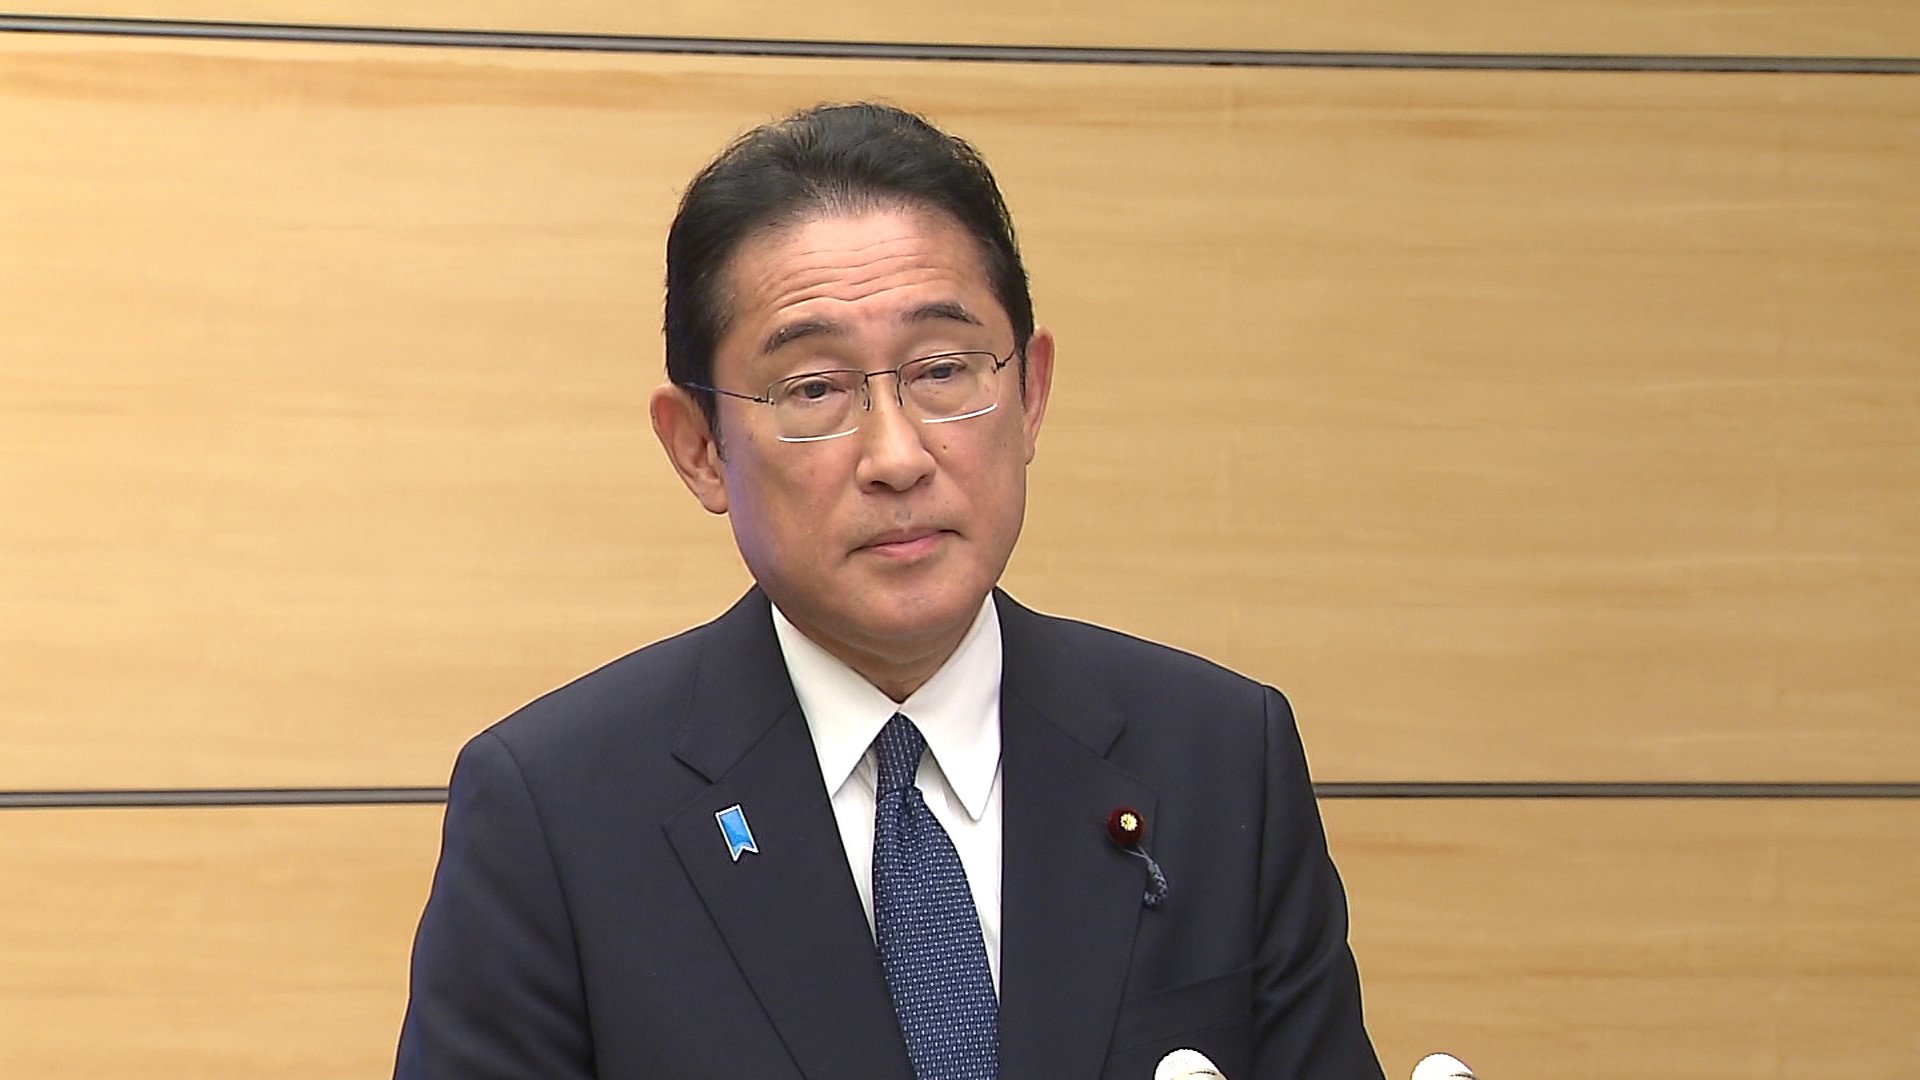 Press Conference by Prime Minister Kishida Regarding the Discharge of ALPS Treated Water into the Sea, the Overall Review of My Number Information and Other Matters